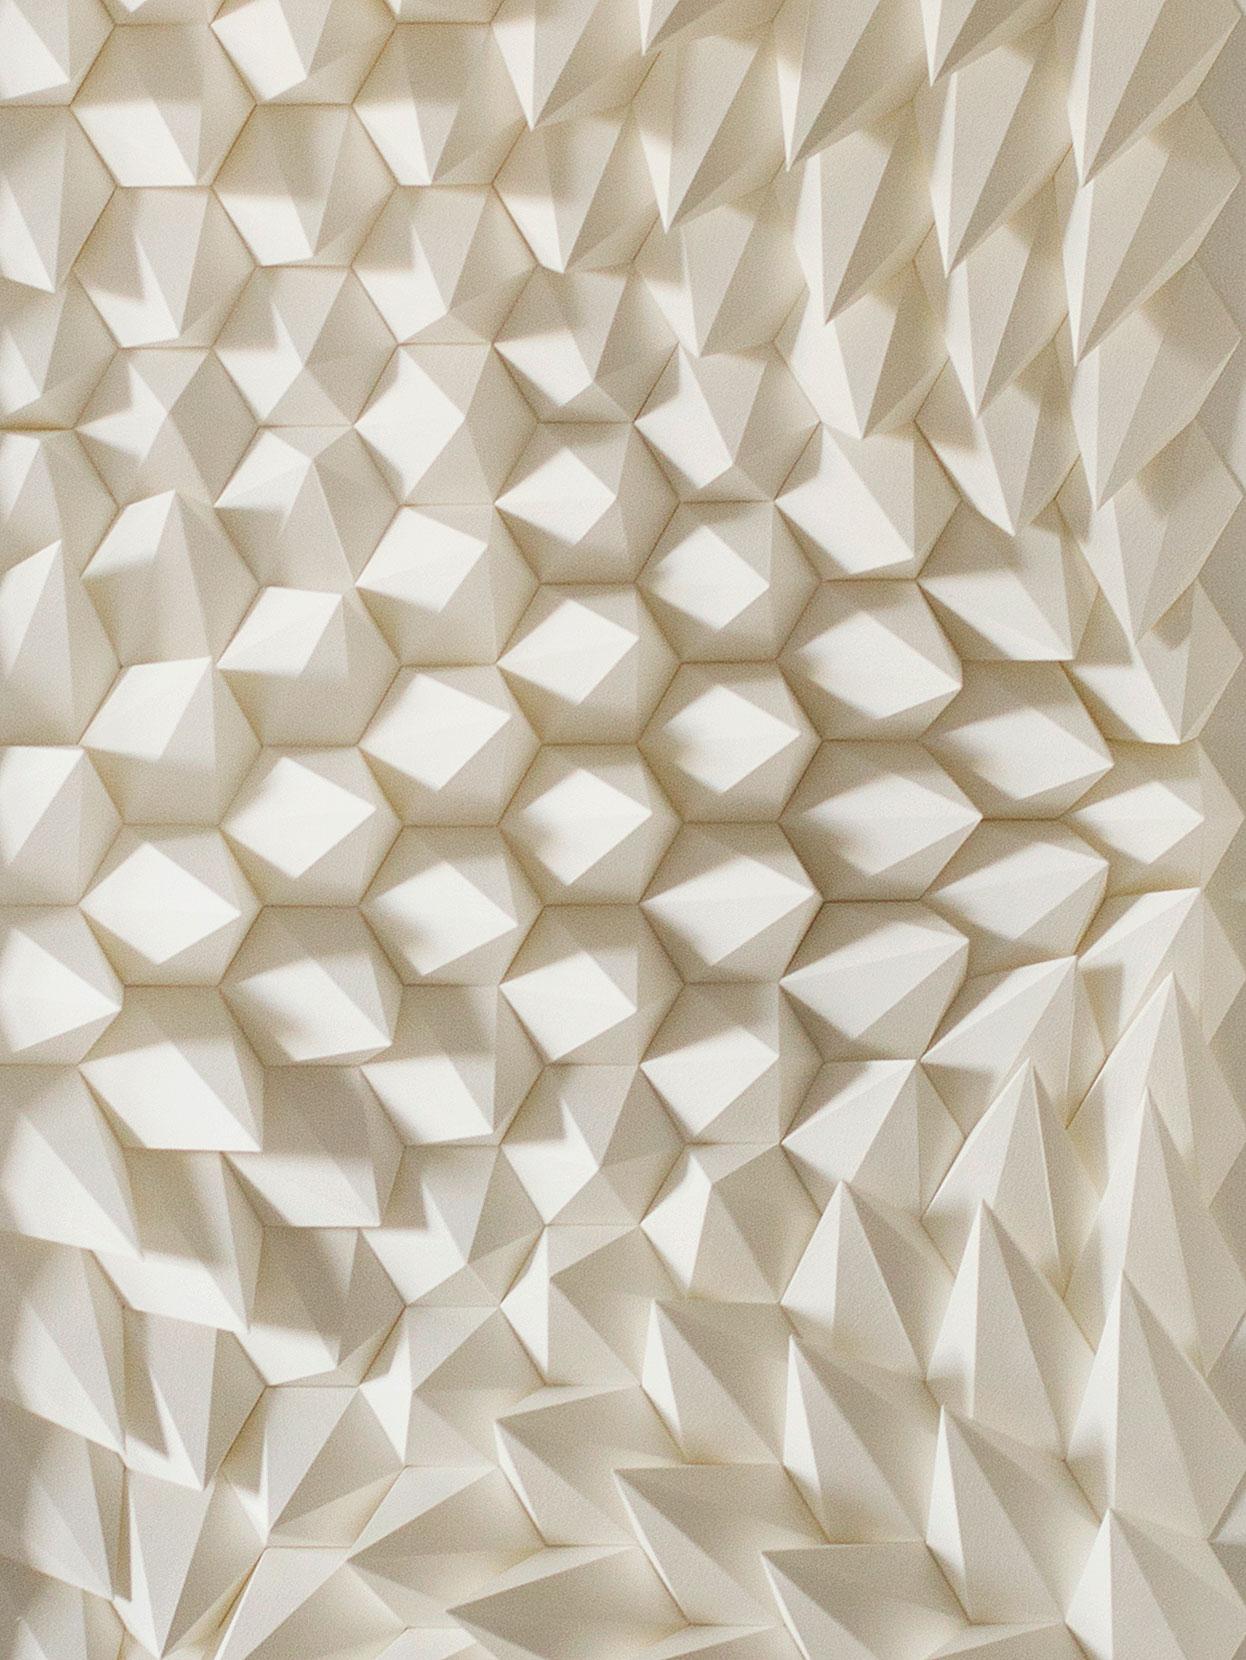 U 182 - white abstract geometric minimalist 3D composition with folded paper  - Art by Anna Kruhelska